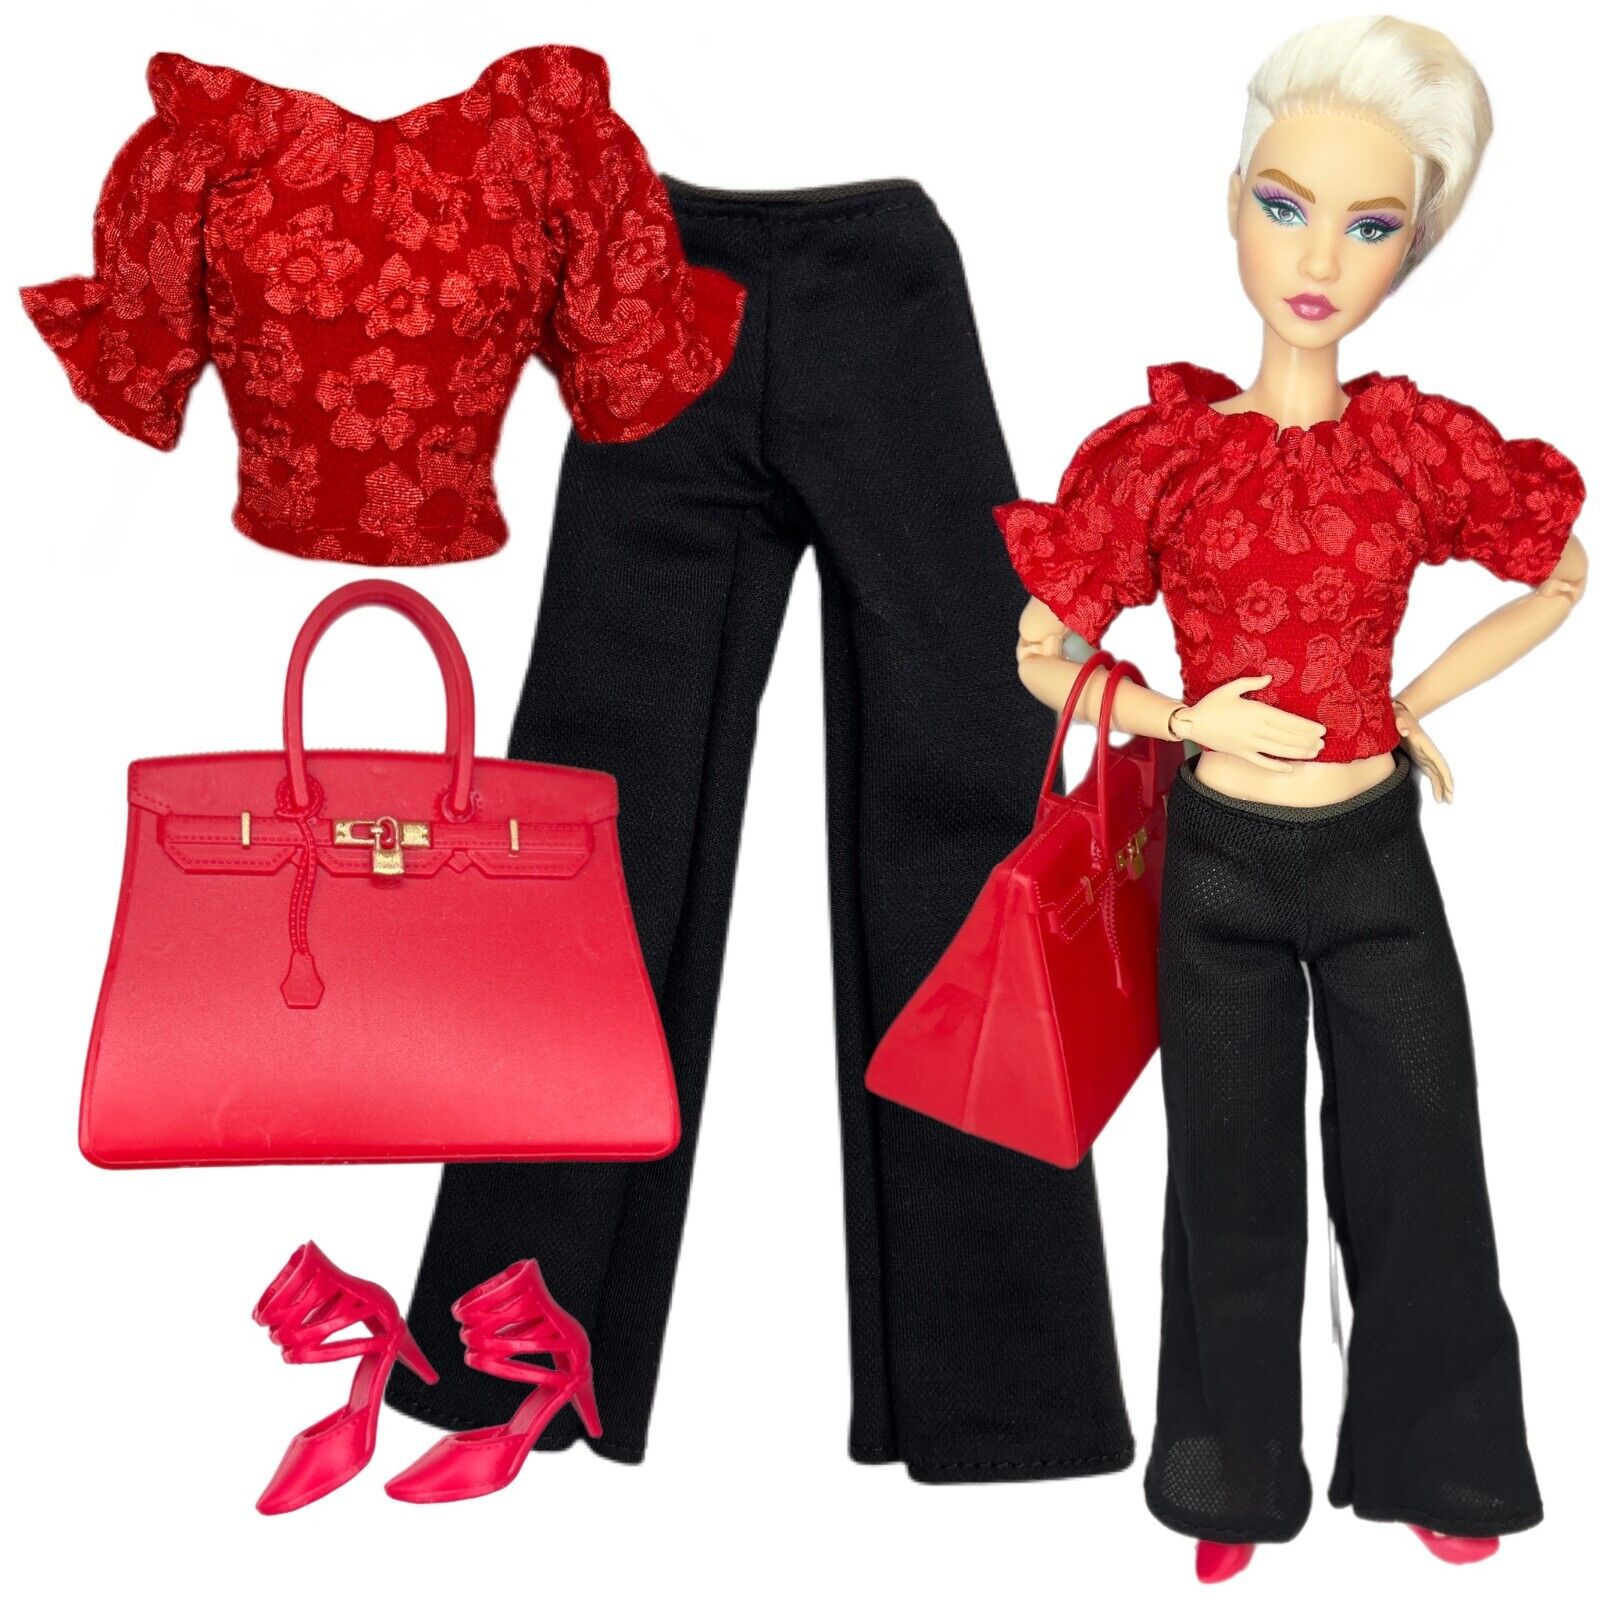 Eledoll Clothes Fashion Pack For The 12” Fashion Doll Red Set